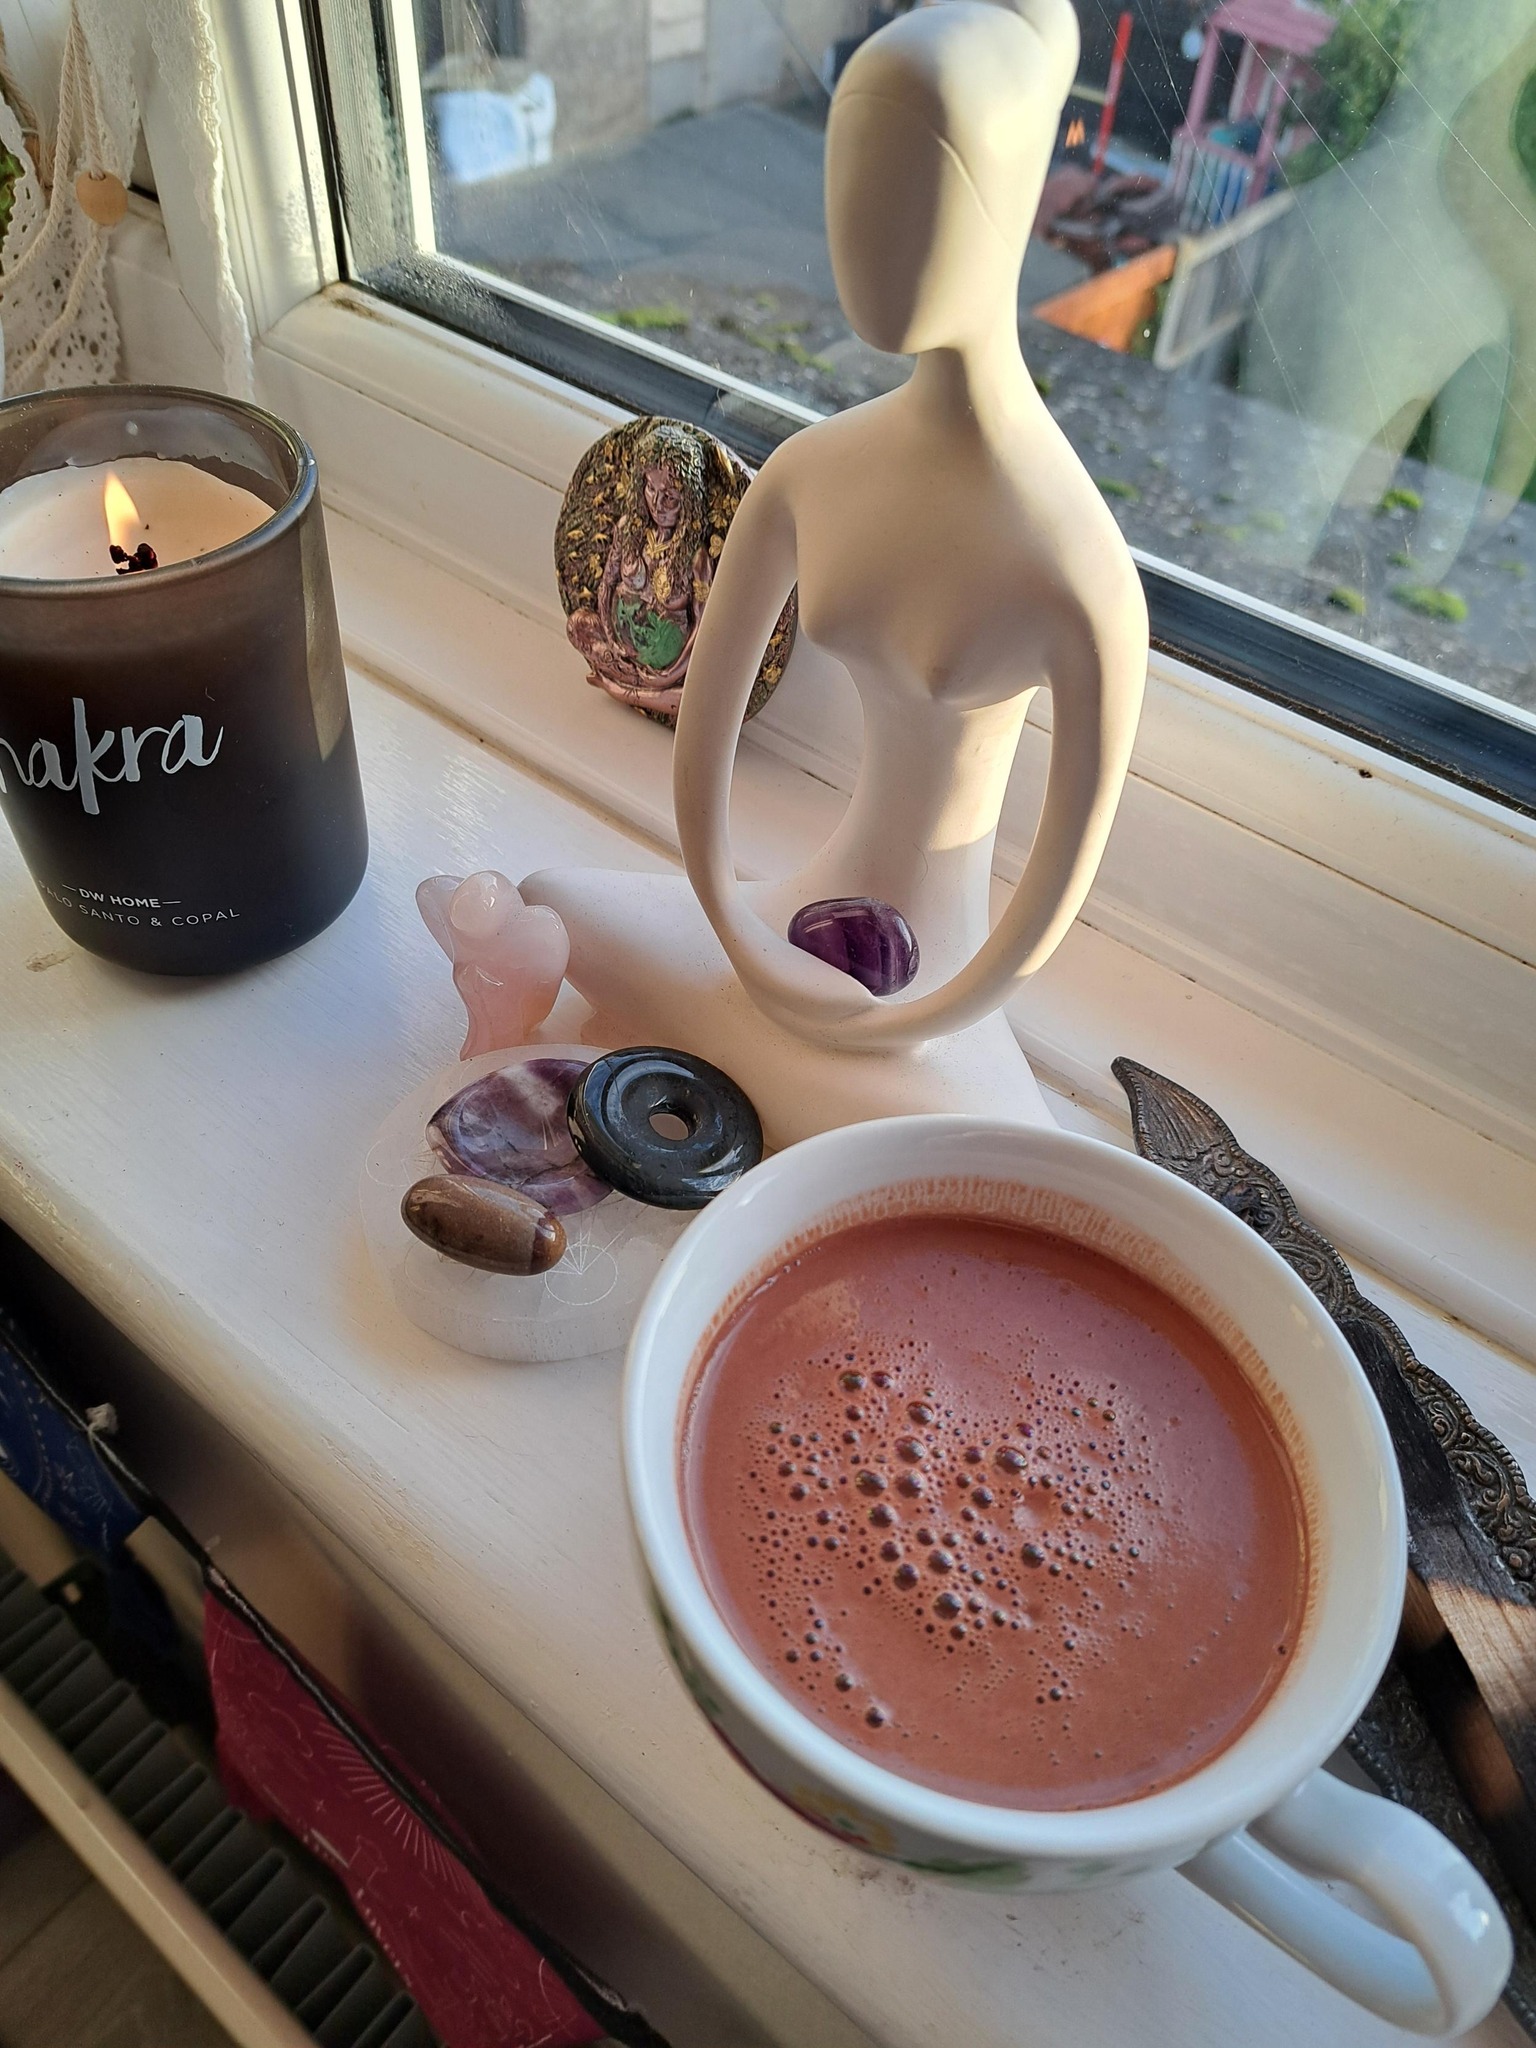 Image of yoga statue, candle and cup of hot chocolate.